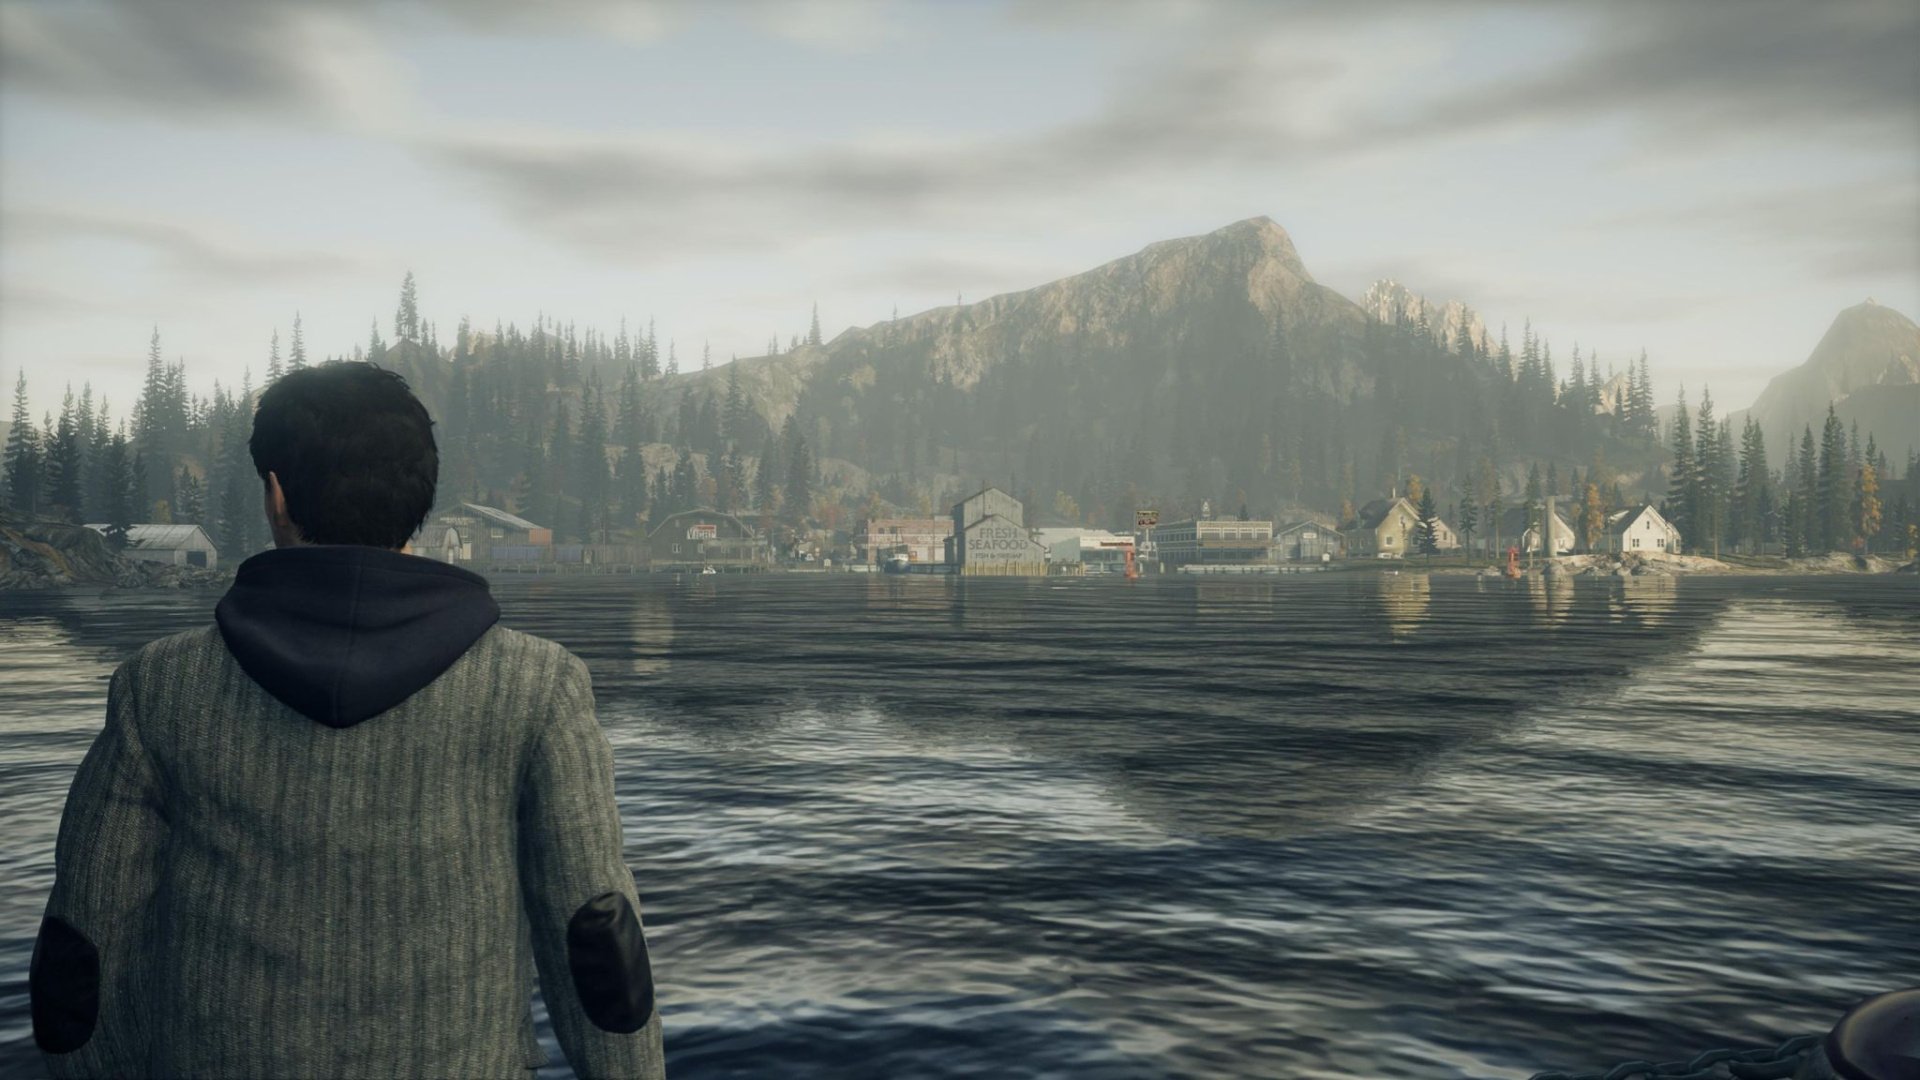 Metacritic - Alan Wake Remastered reviews are also coming